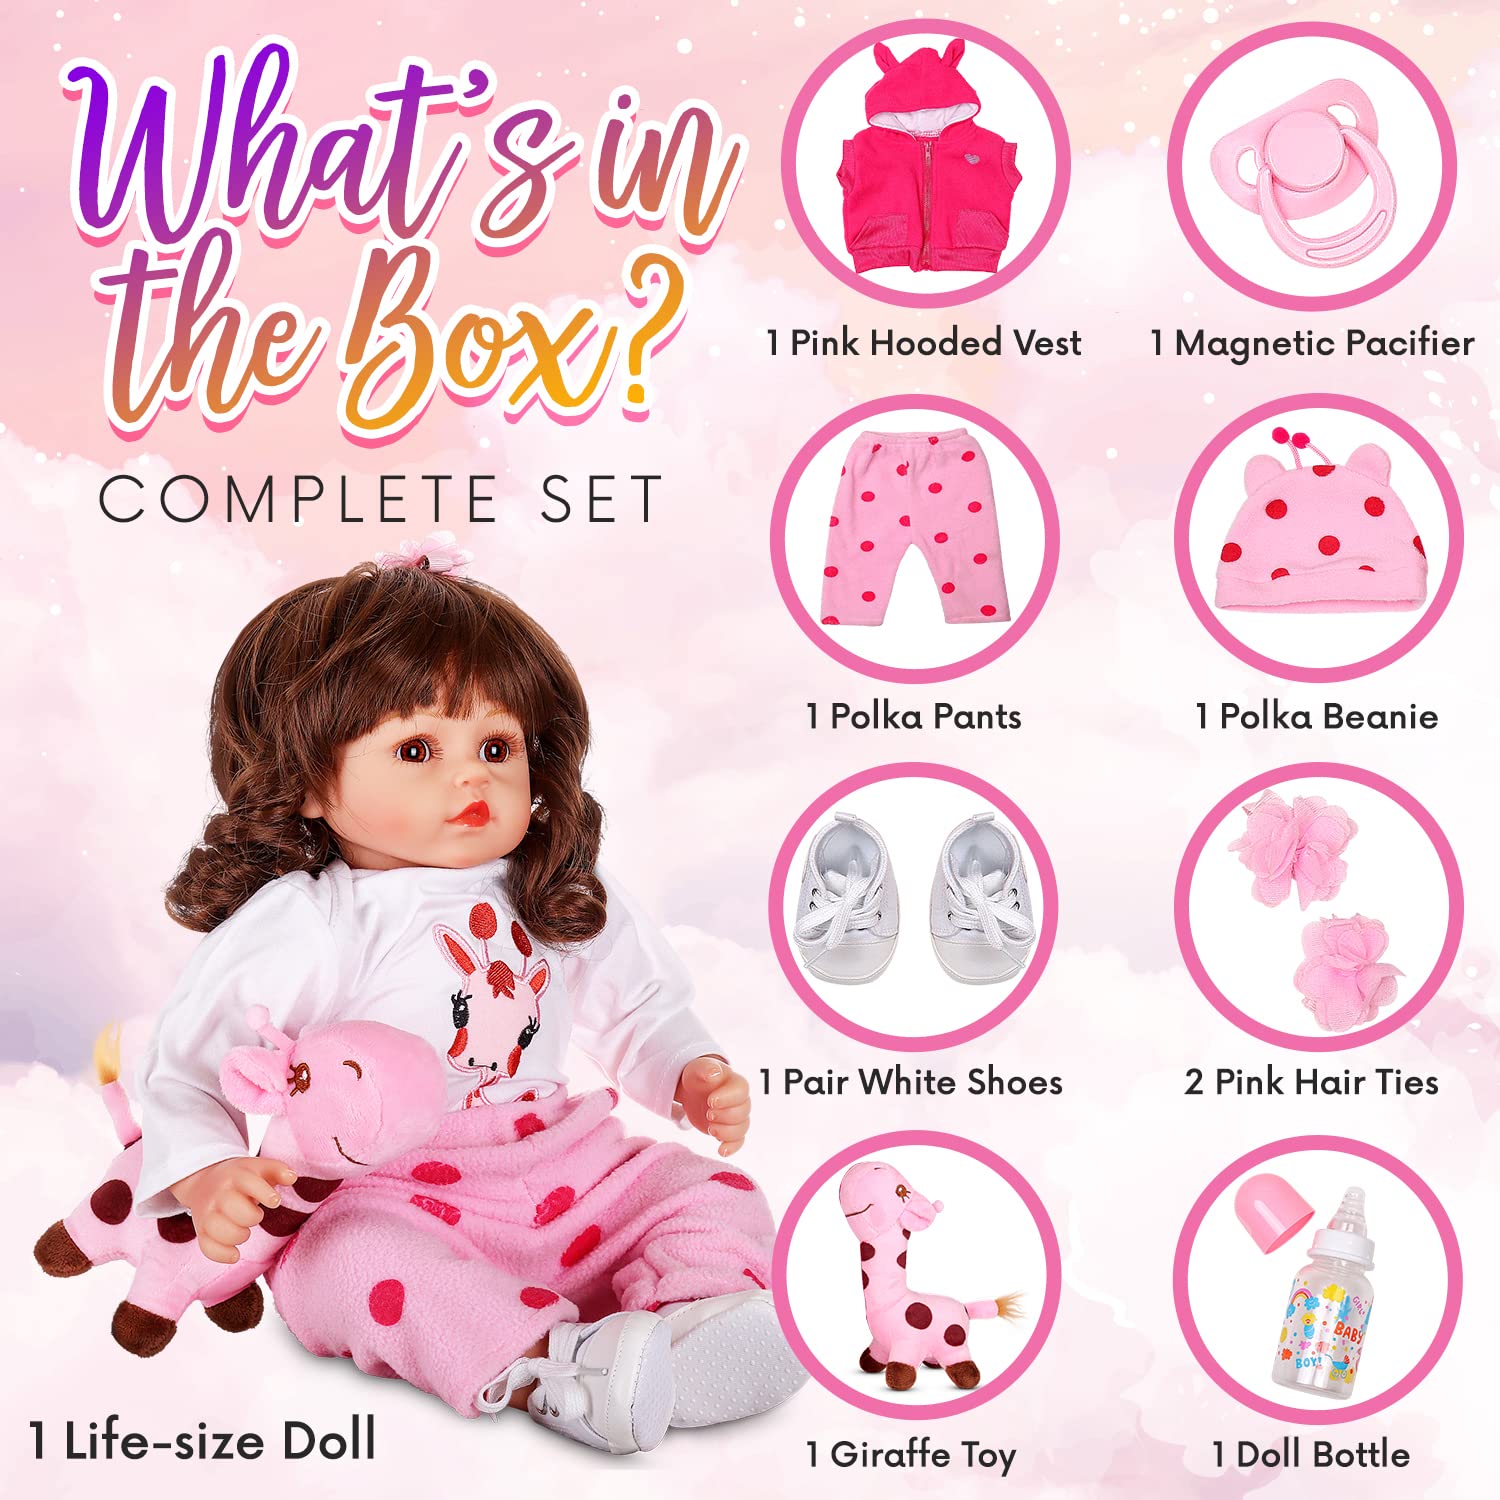 DOLLHOOD Reborn Baby Dolls - 18-Inch Realistic Baby Doll with Complete Baby Doll Accessories - Lifelike, Soft Newborn Girl Doll with 360° Movable Arms and Legs. Includes Birth Certificate